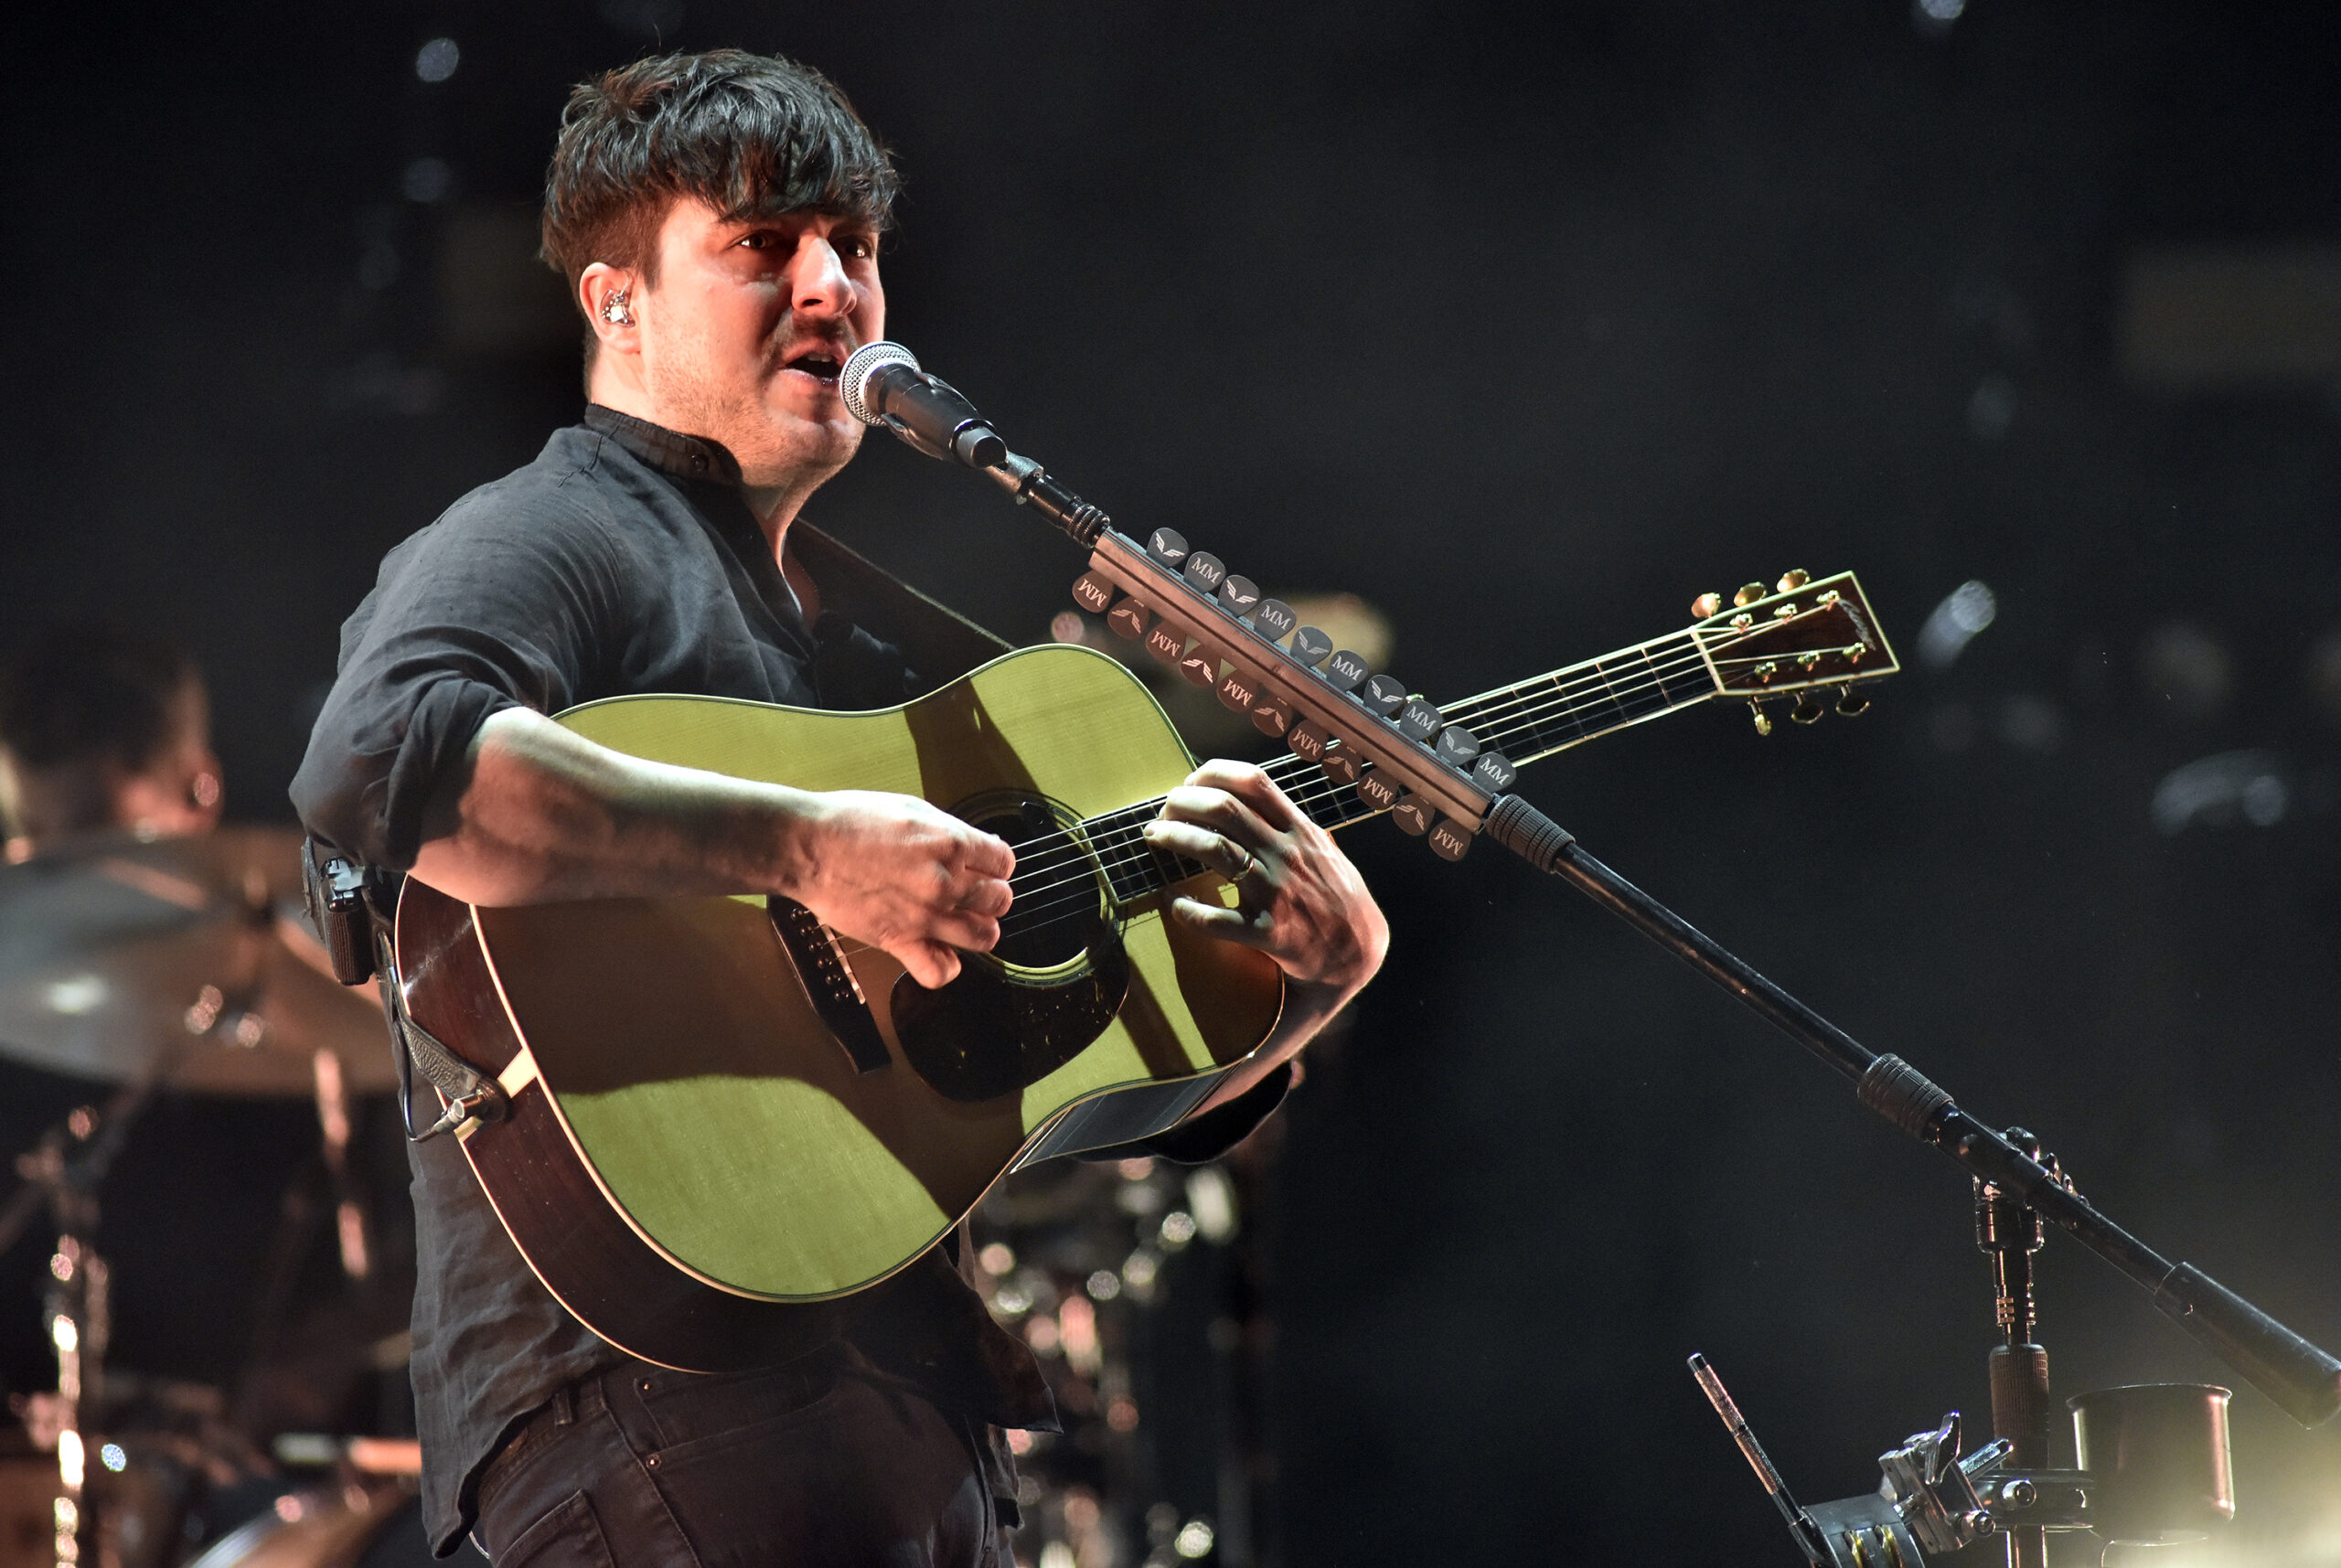 Marcus Mumford, Lucius, Joy Oladokun Among First Artists Announced in Hardly Strictly Bluegrass 2022